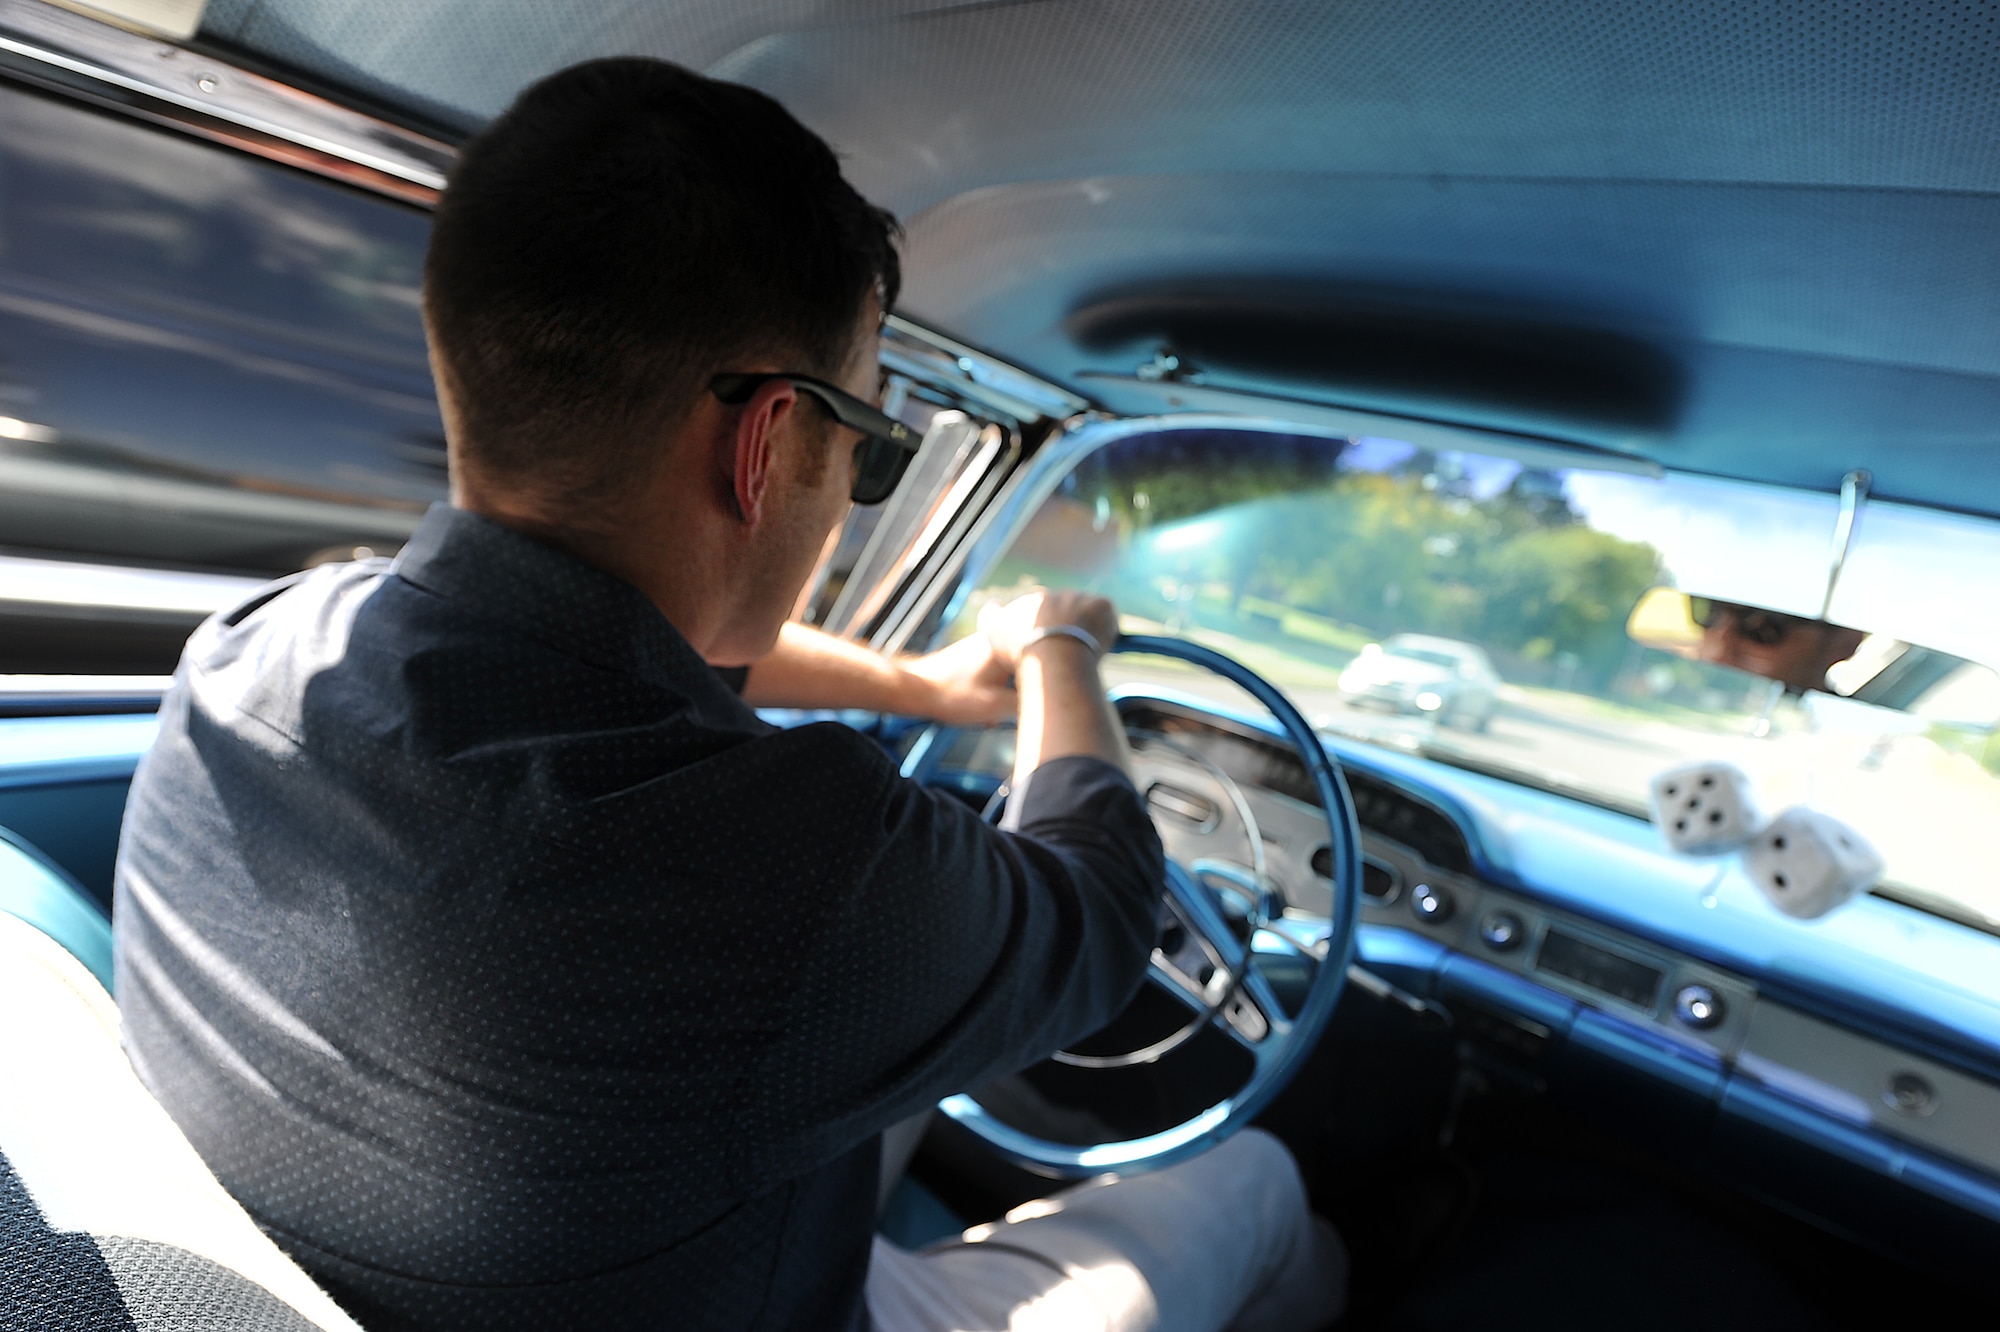 Master Sgt. Bobby McCrary, 22nd Force Support Squadron NCO in-charge of Honor Guard, drives his car 1958 Chevy Impala, July 13, 2017, at his home in Derby, Kan. Growing up McCrary traveled up and down the state of Texas with his grandfather looking for car parts and meeting other car enthusiasts. (U.S. Air Force photo/Senior Airman Jenna K. Caldwell)